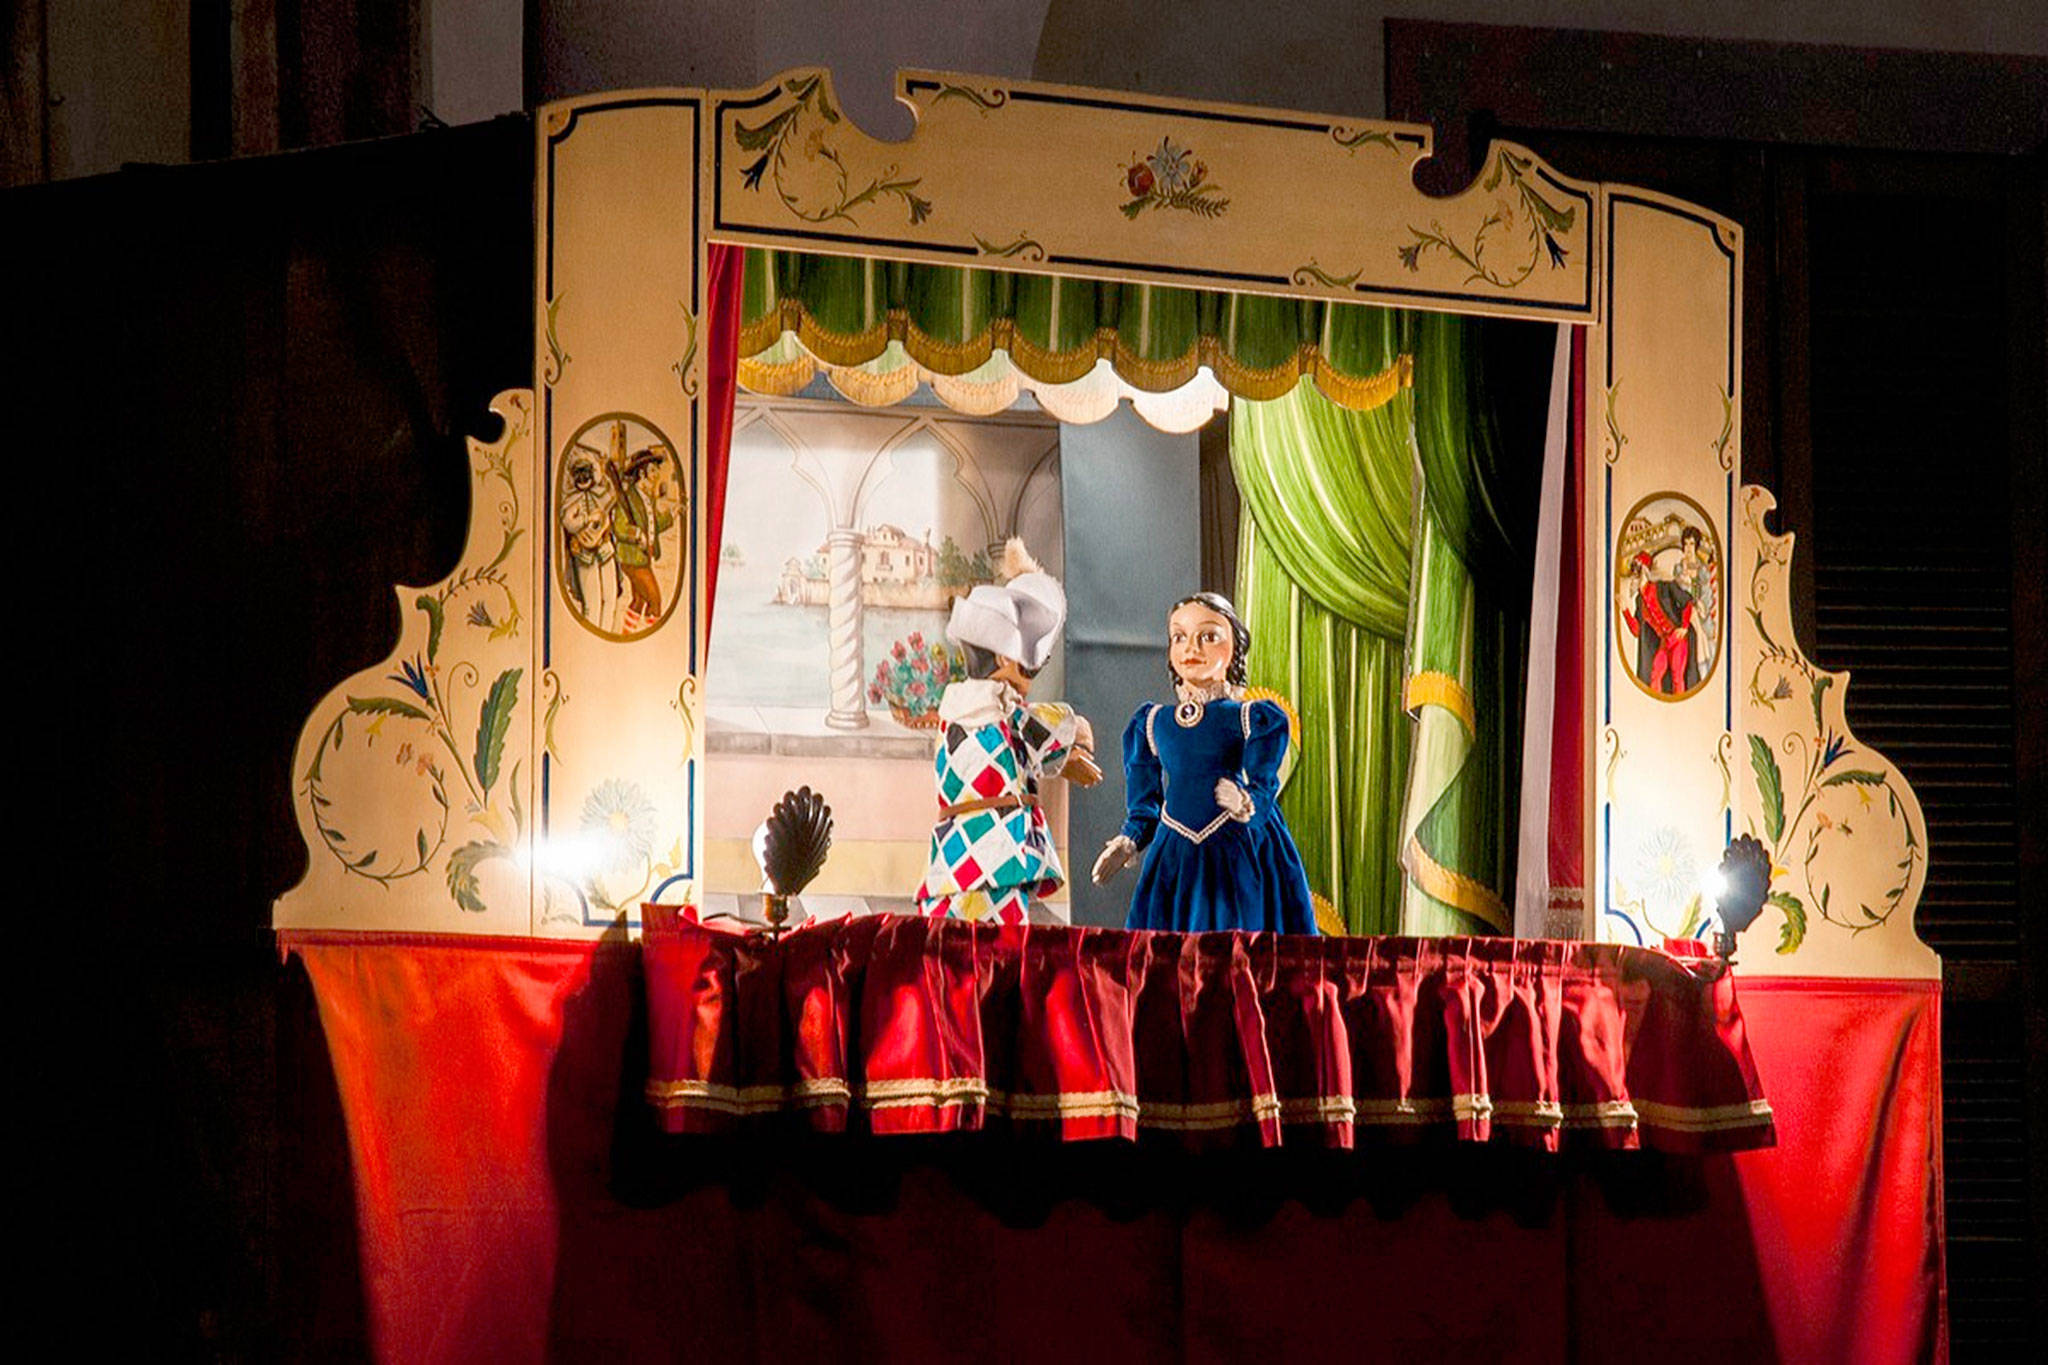 An interactive German puppet show will be featured at the Children’s Multicultural Holiday Festival.